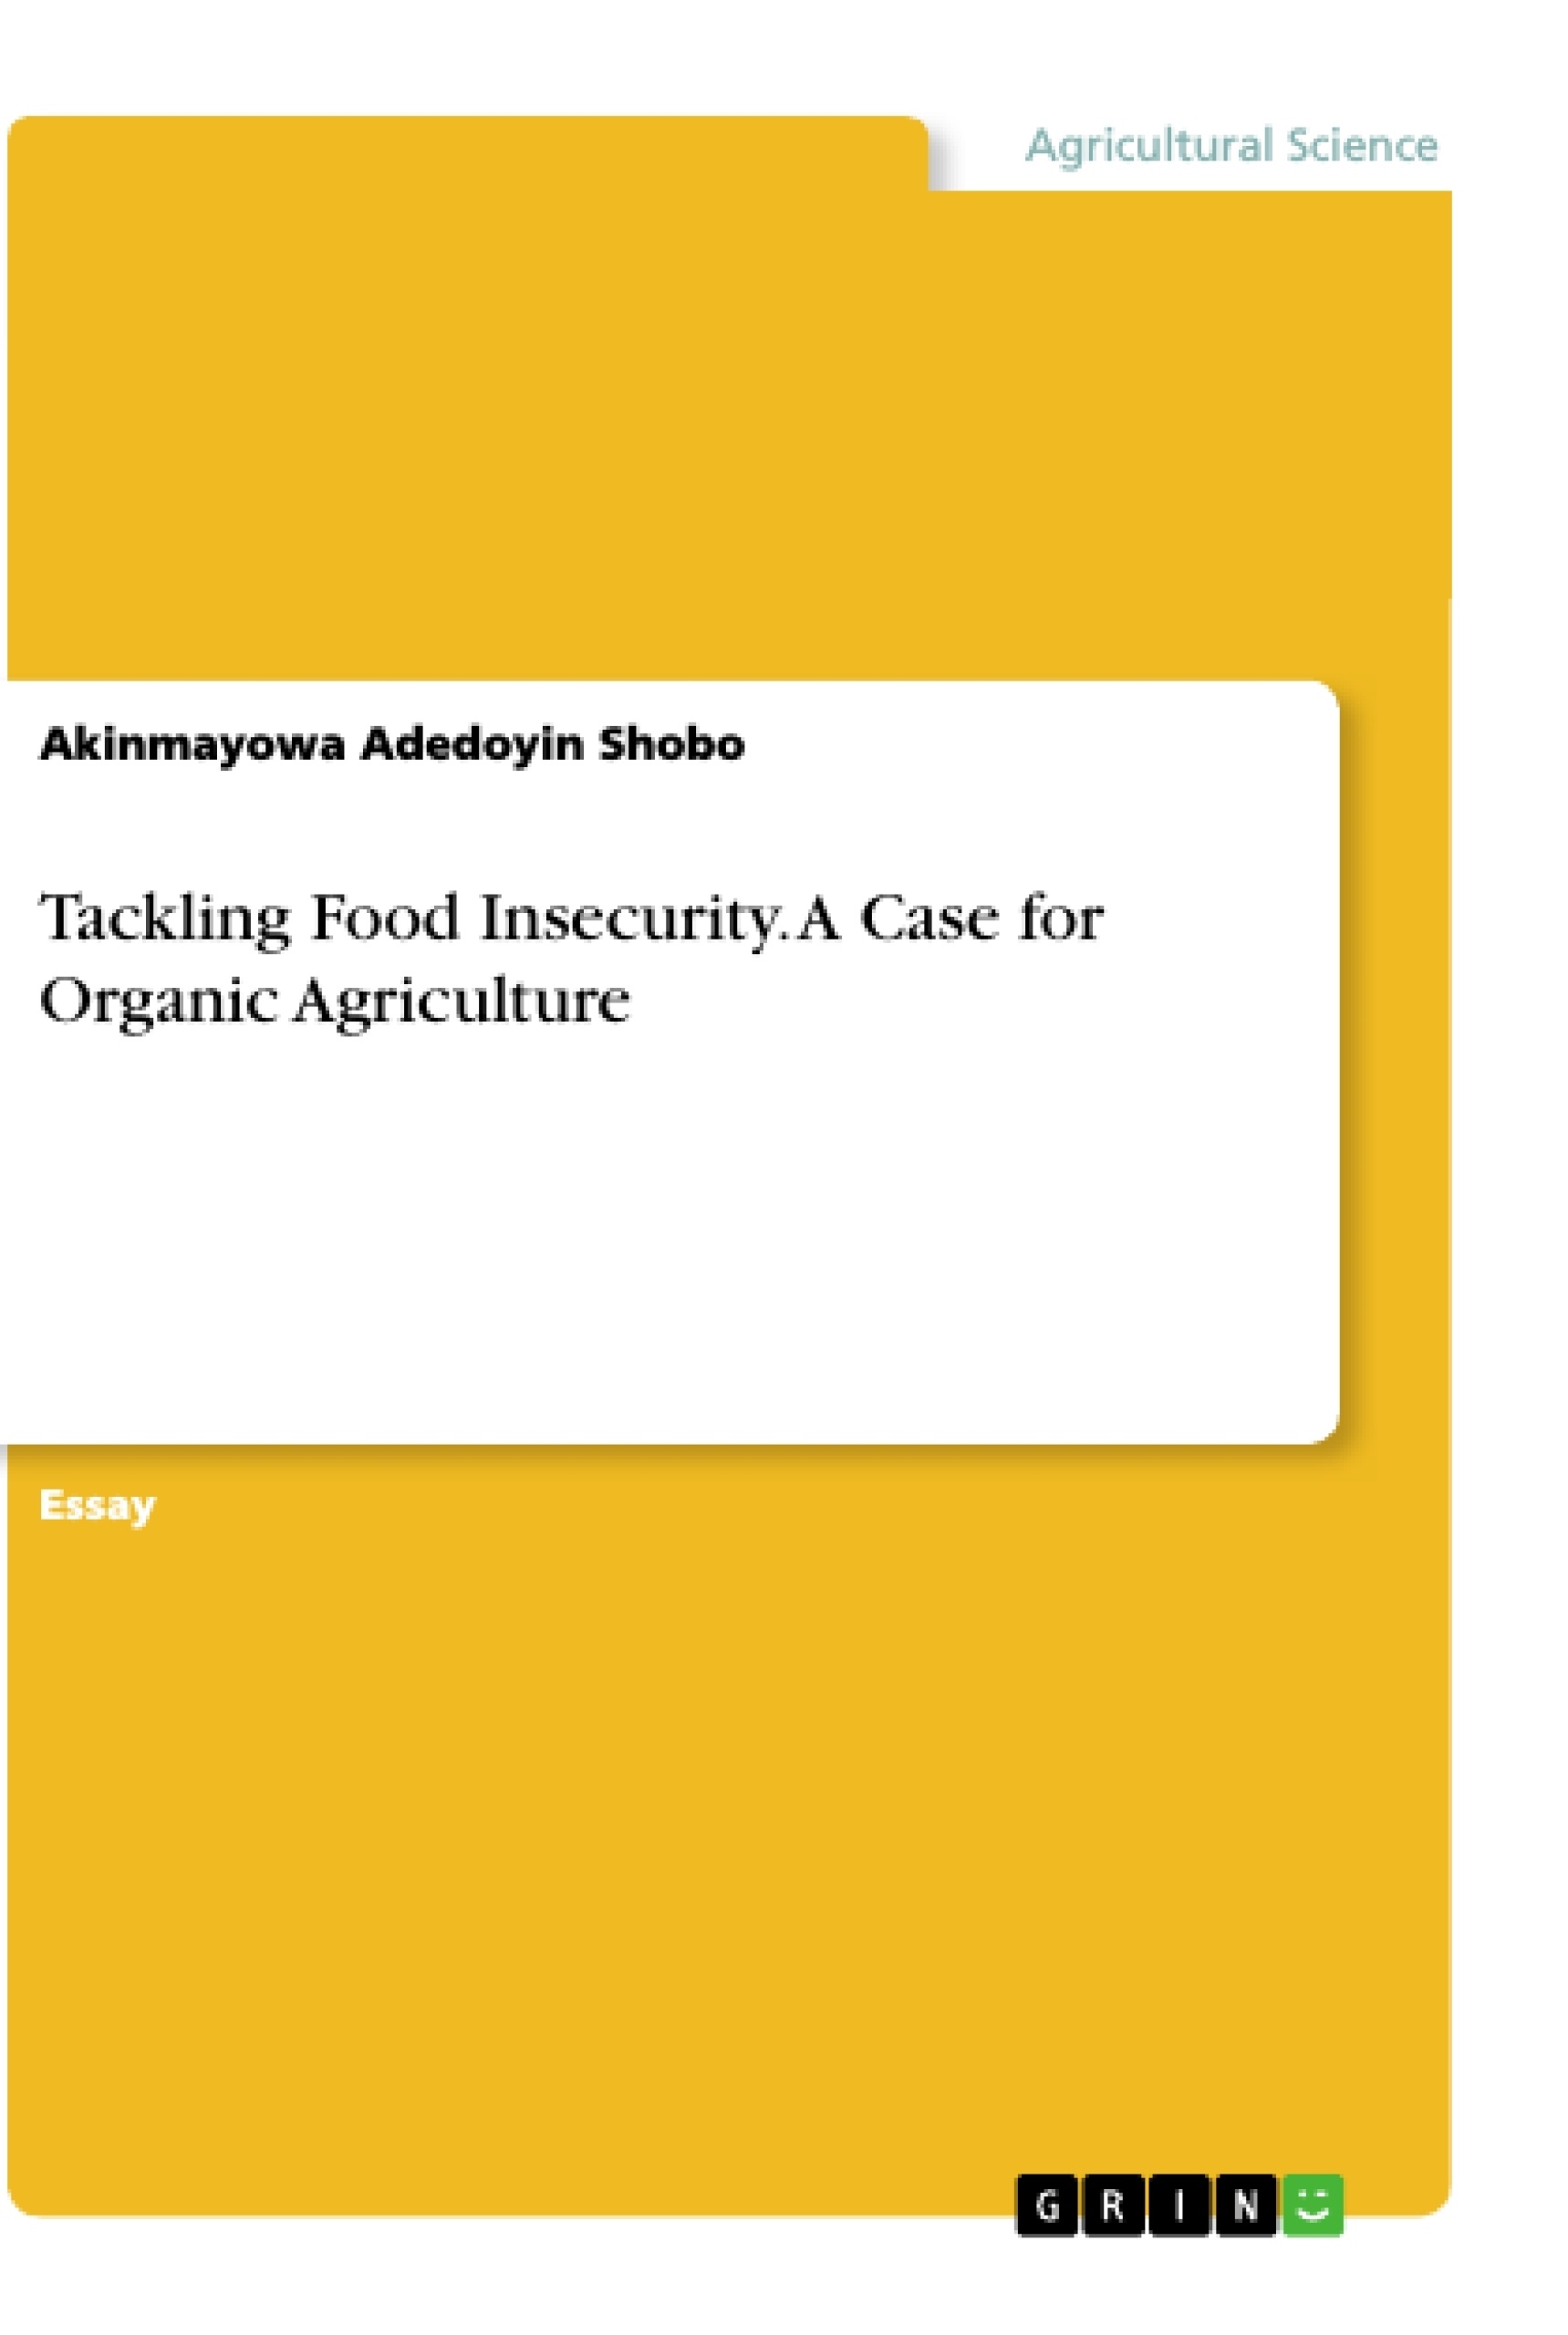 Title: Tackling Food Insecurity. A Case for Organic Agriculture